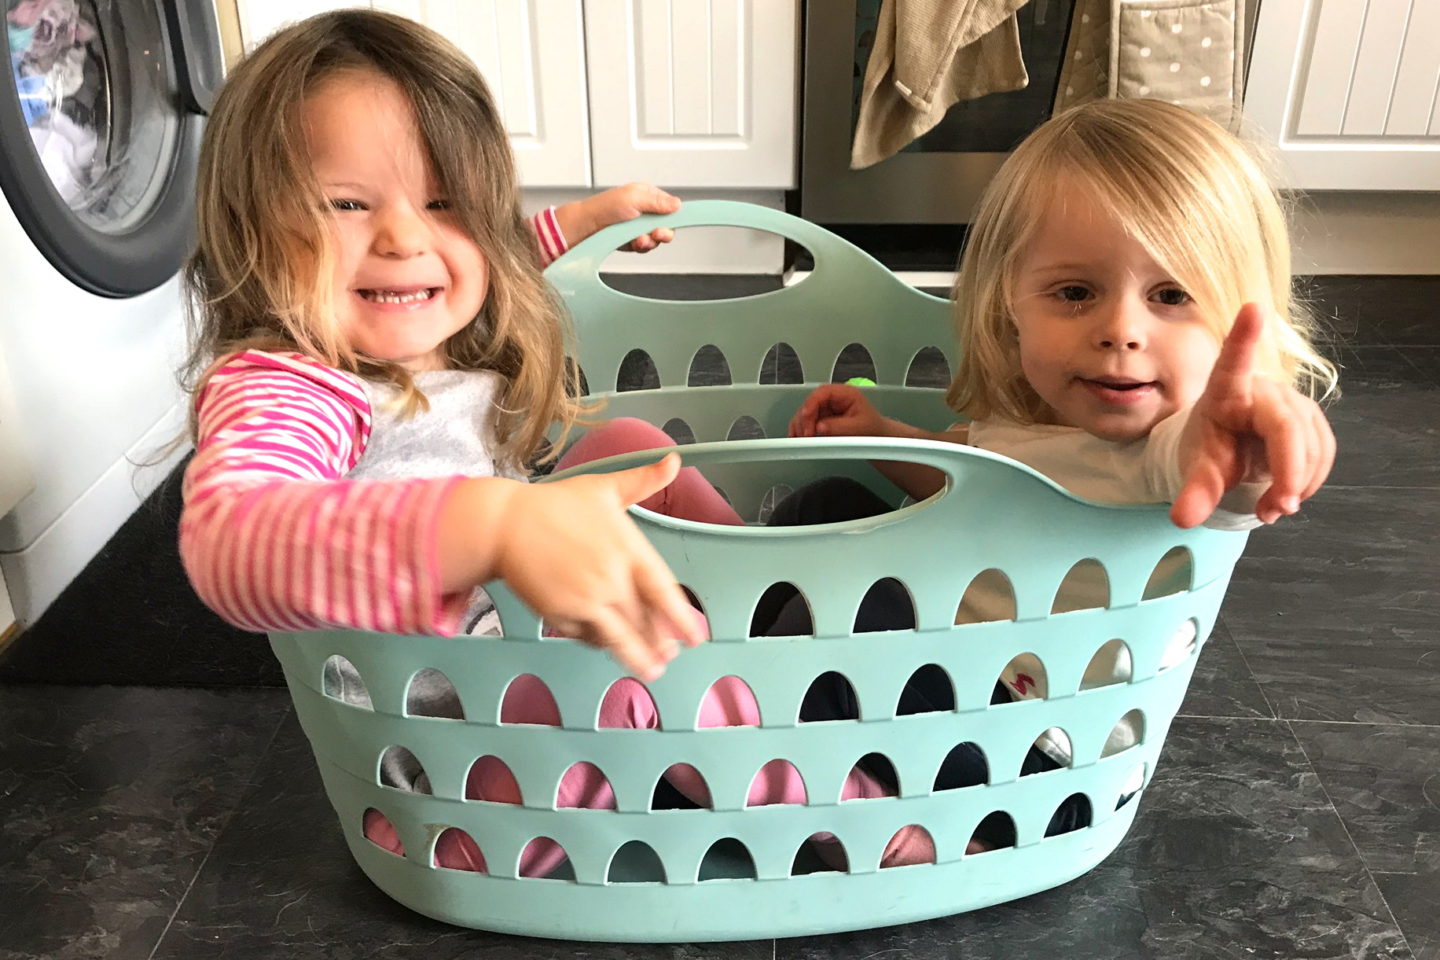 two sisters sitting in a washing basket, laughing